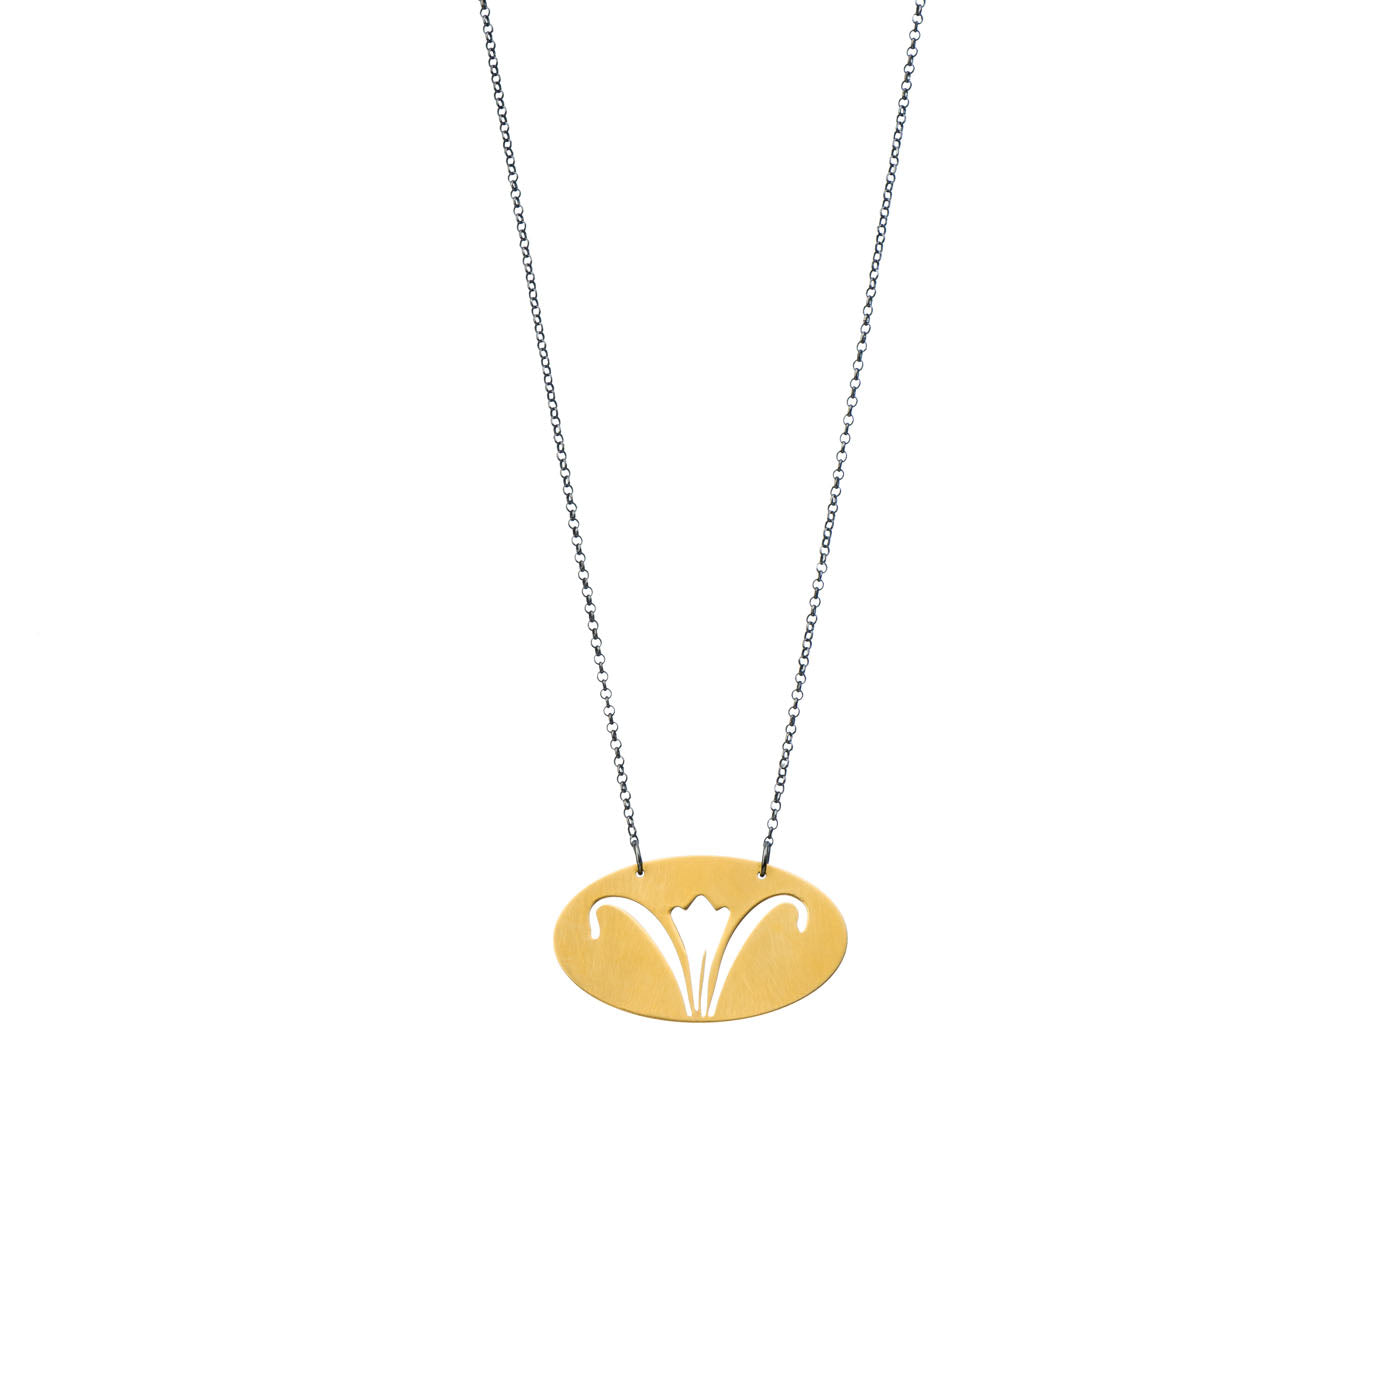 Lily - chain necklace - silver 925 - gold plated mat texture